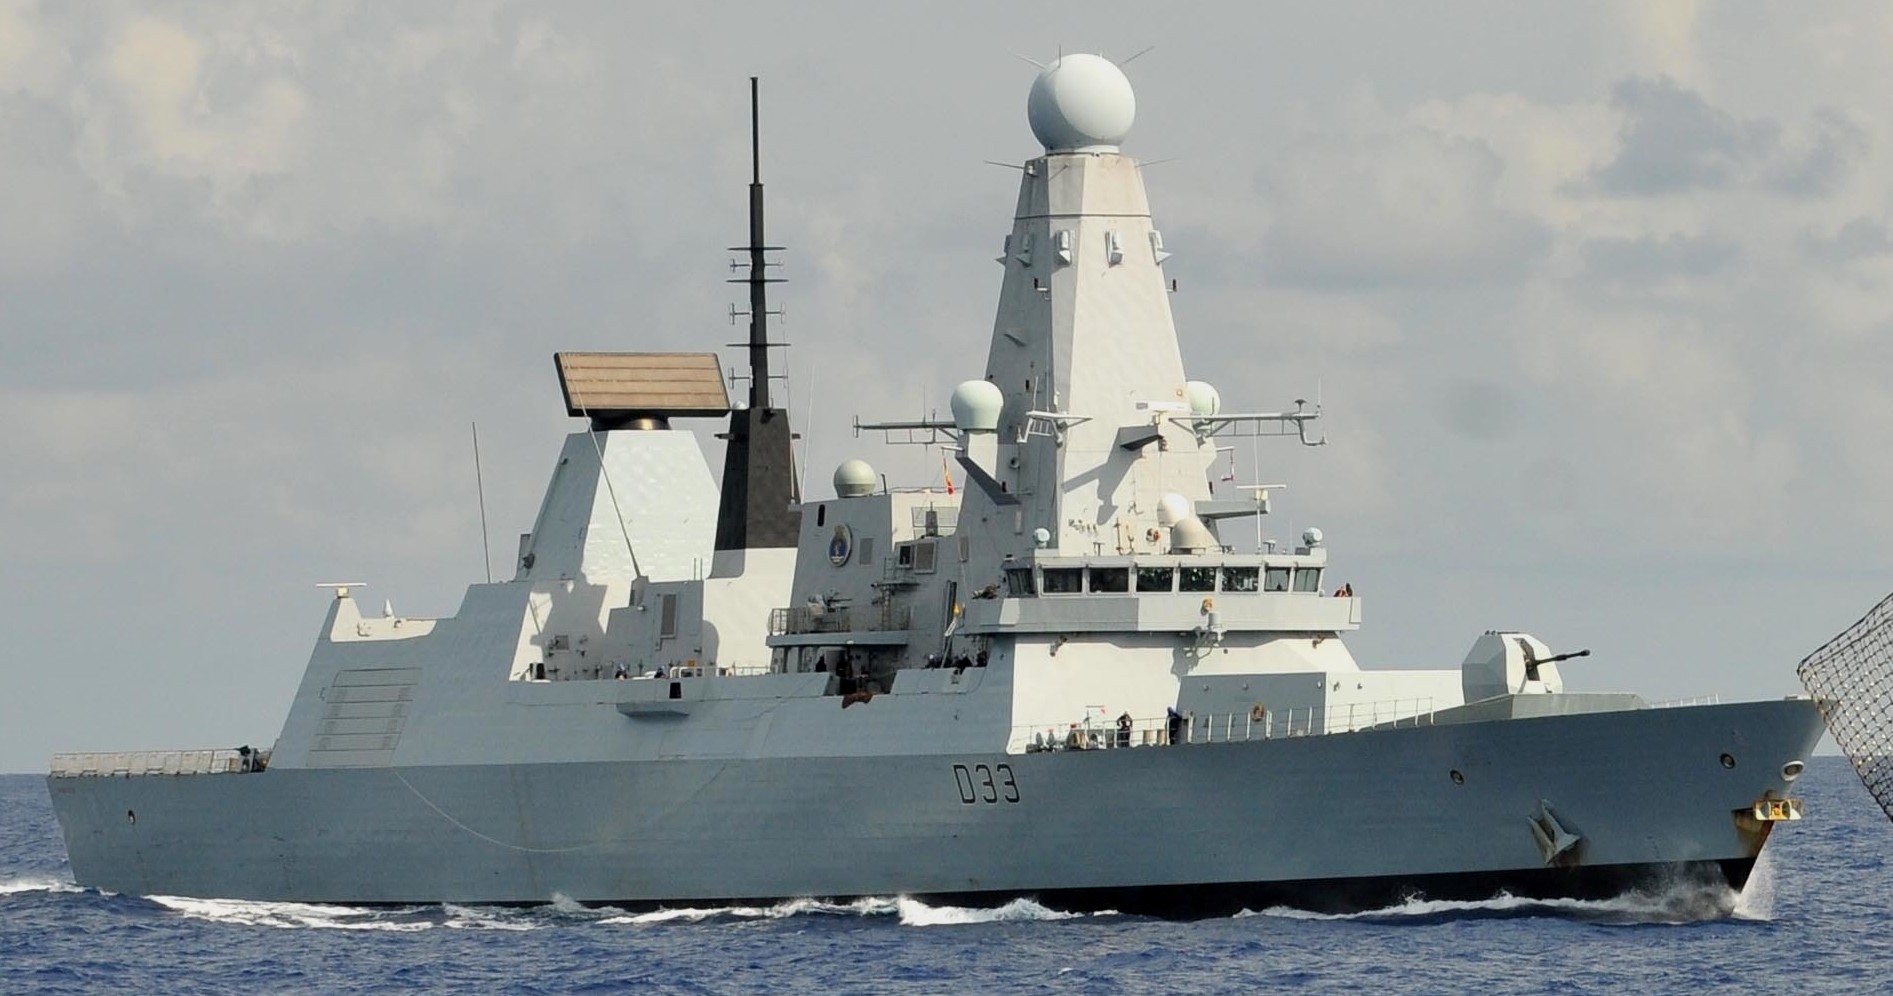 hms dauntless d-33 type 45 daring class guided missile destroyer ddg royal navy sea viper paams 24x bae systems